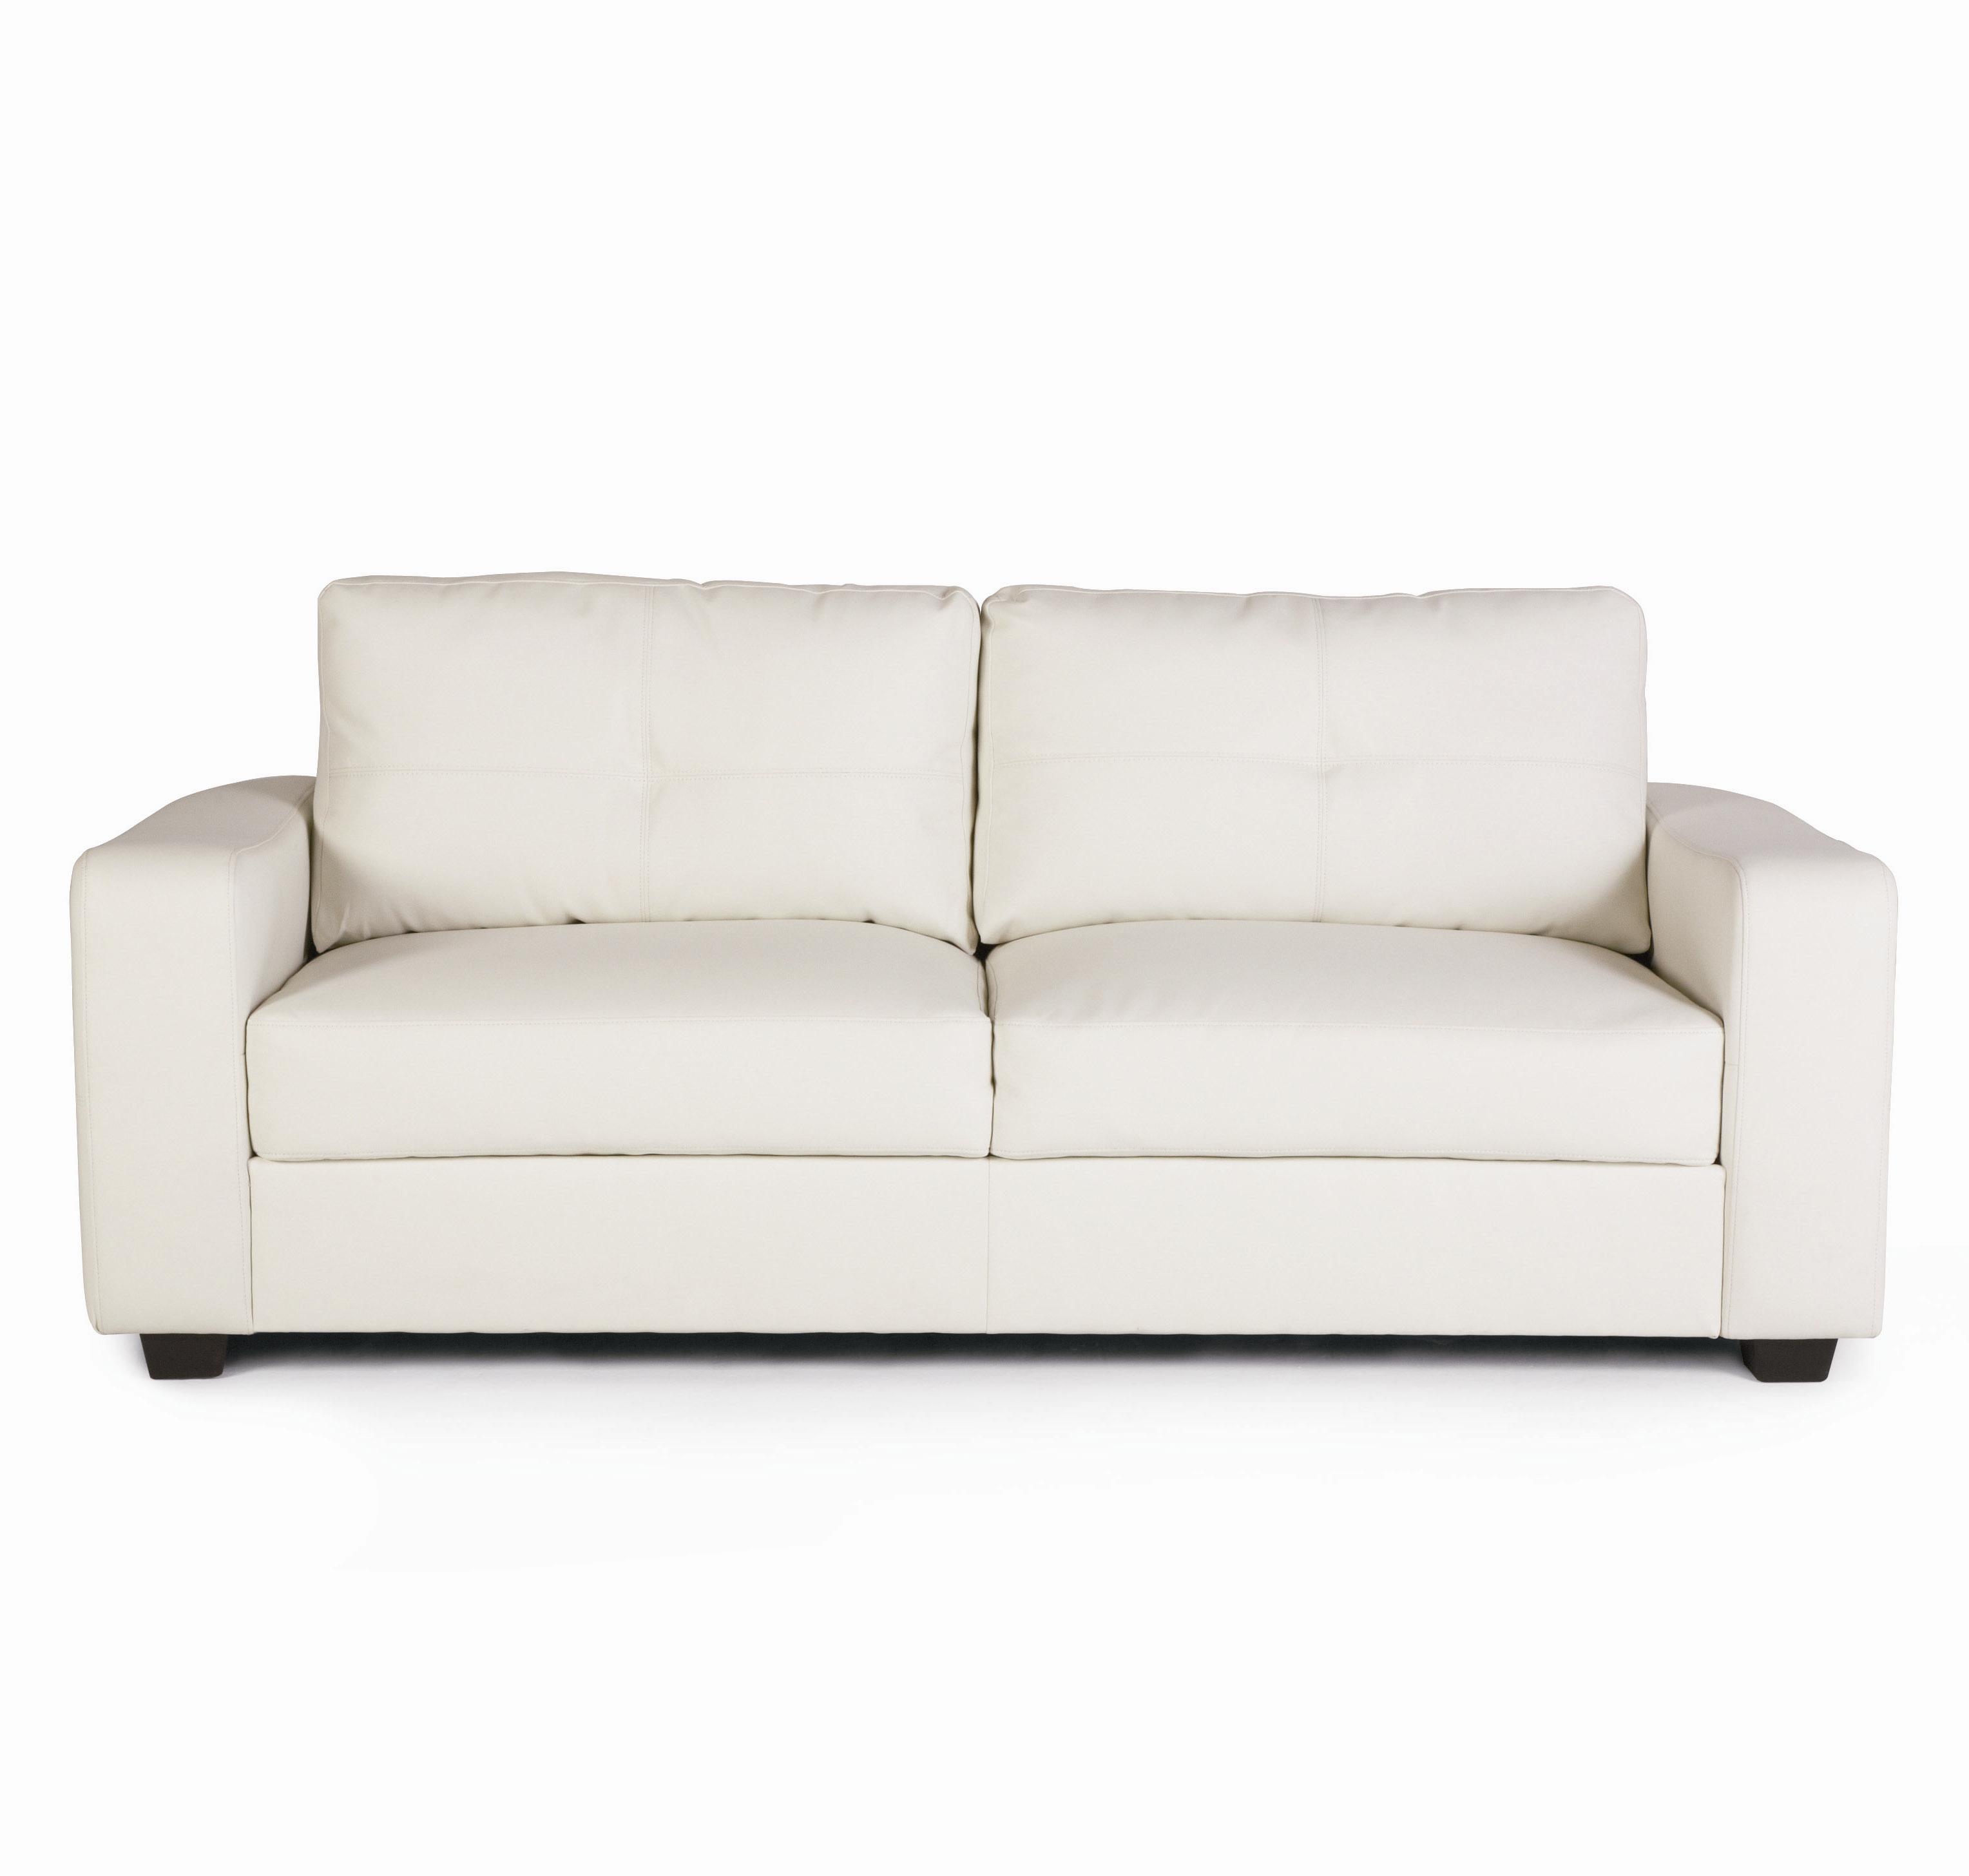 lovely white sofa images 41 with additional sofas and couches ideas with white MBUIFTW